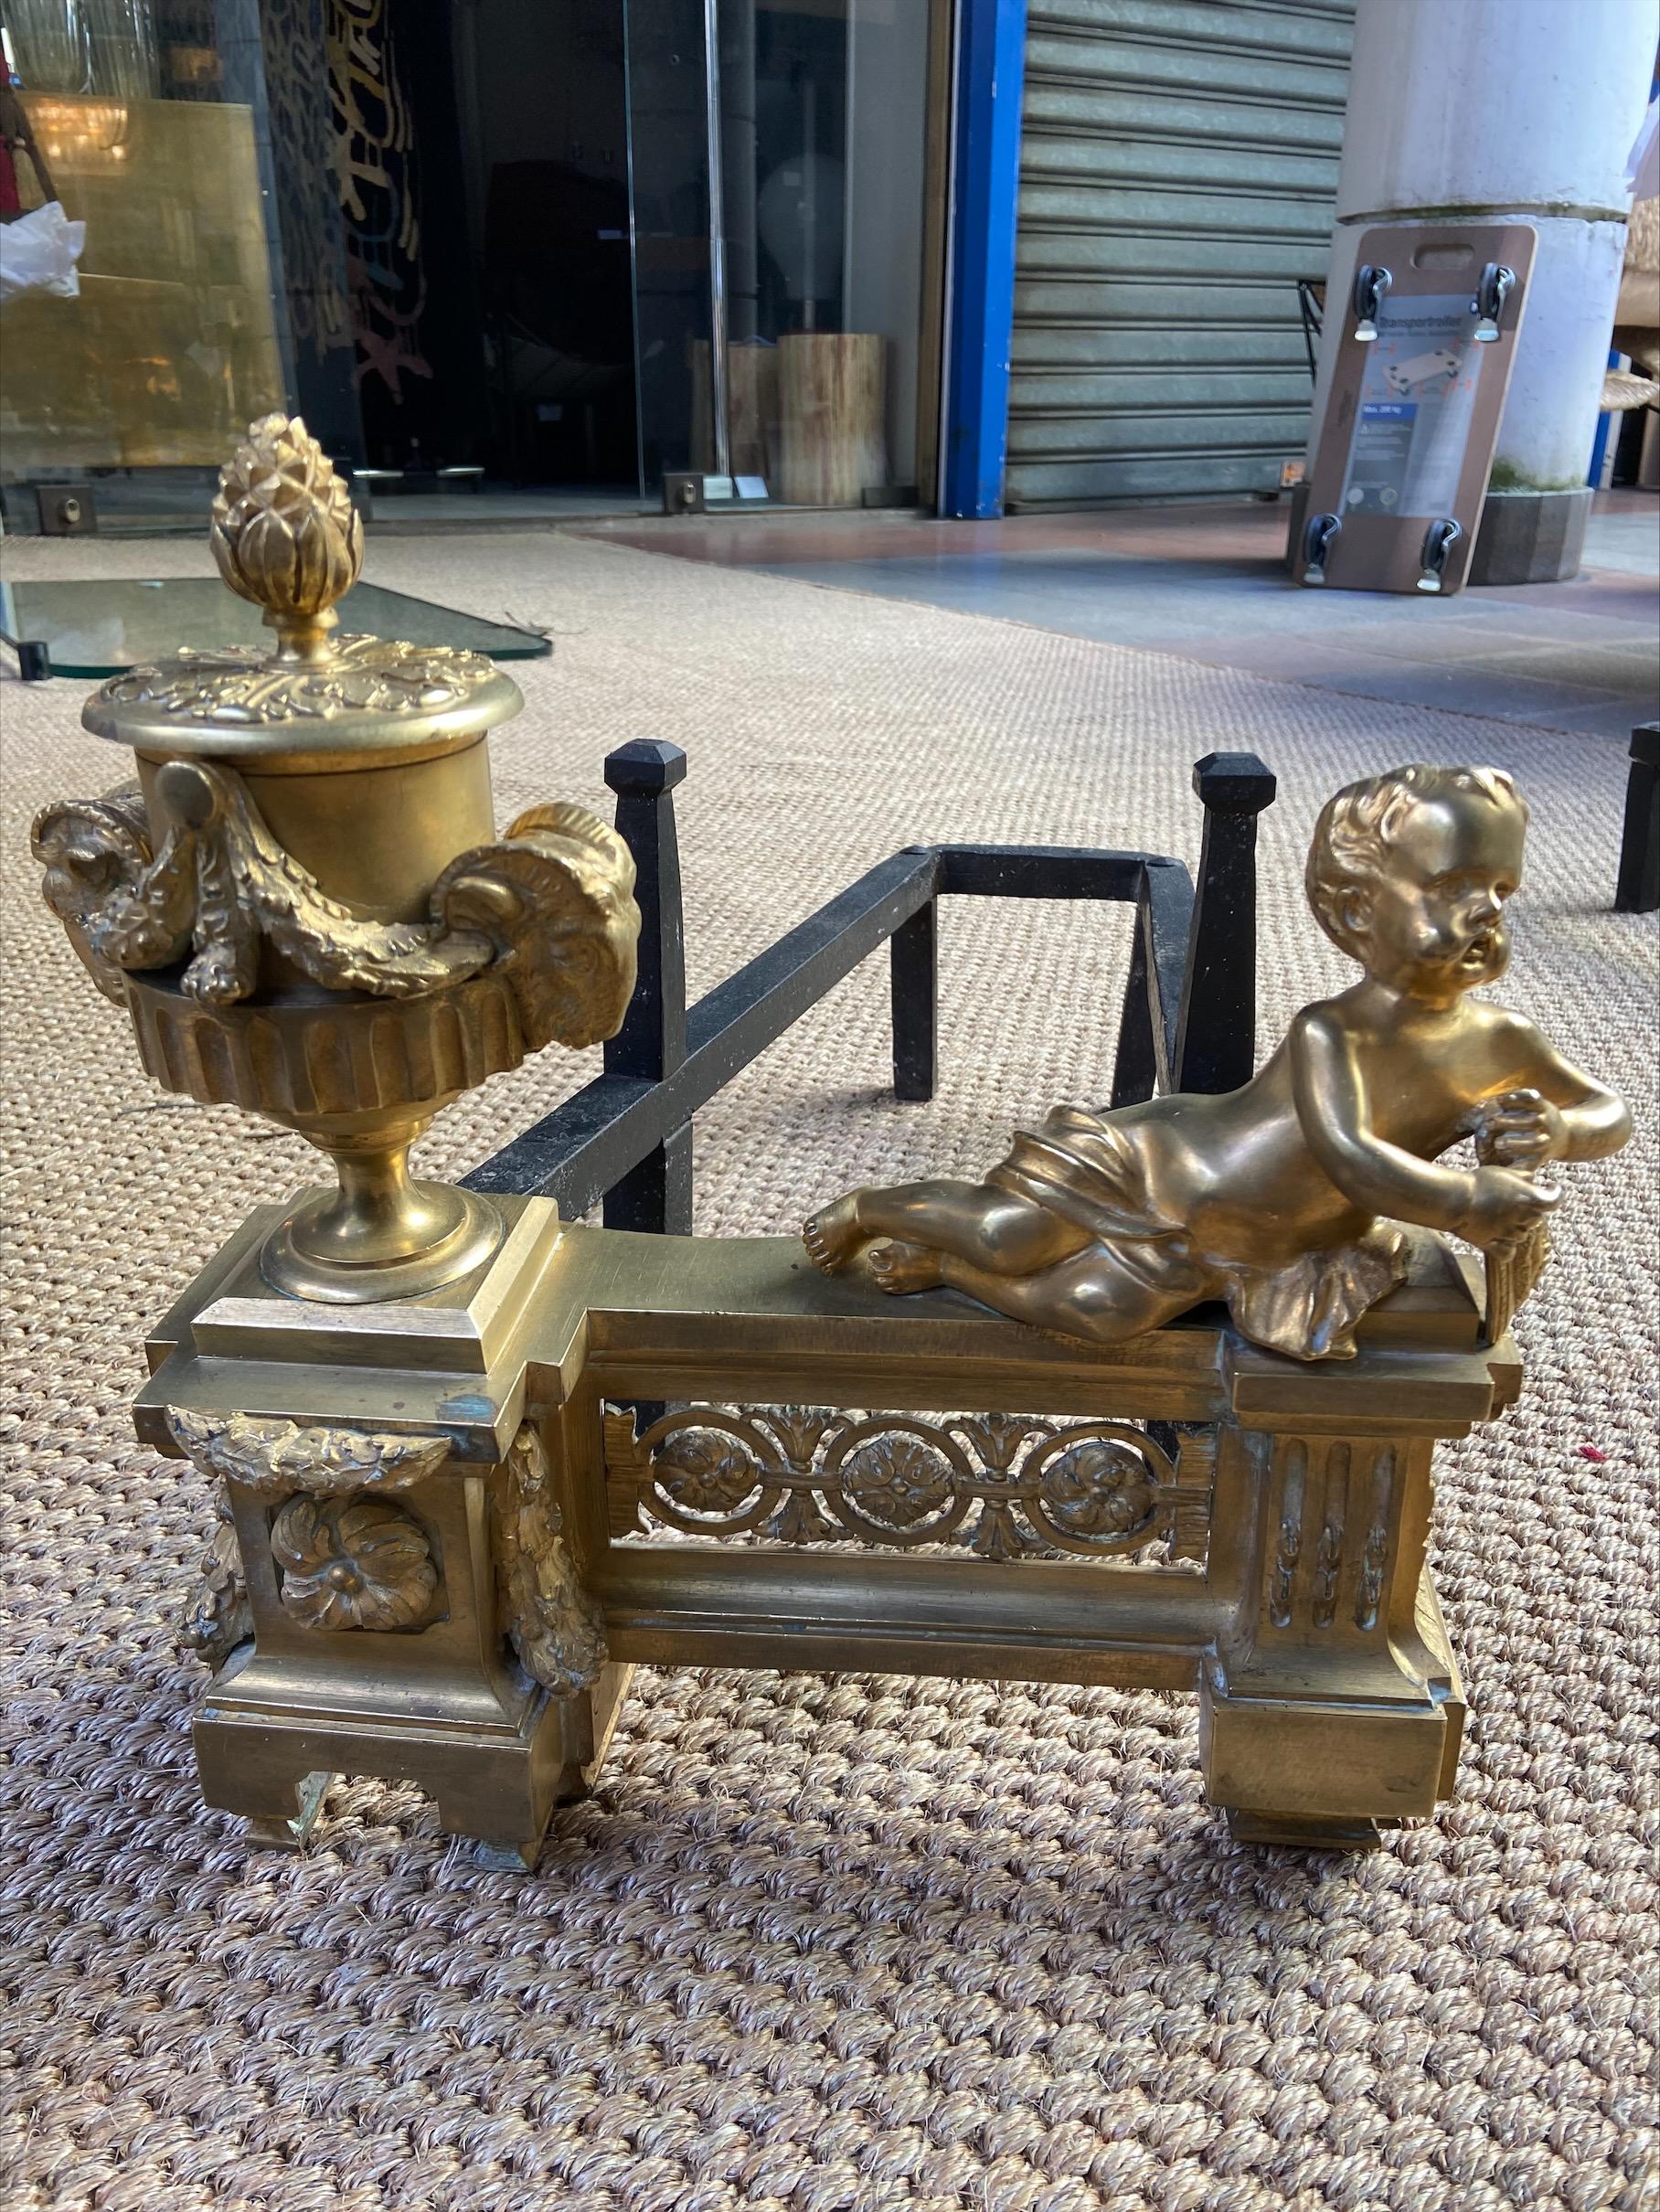 Pair of andirons
Gilt bronze and wrought iron

Measures: H 33 x W 32x D 56 cm

Late 18th century

An andiron is a fireplace accessory. It is a piece of wood or metal often placed in pairs in a fireplace or hearth and used to support the logs, so